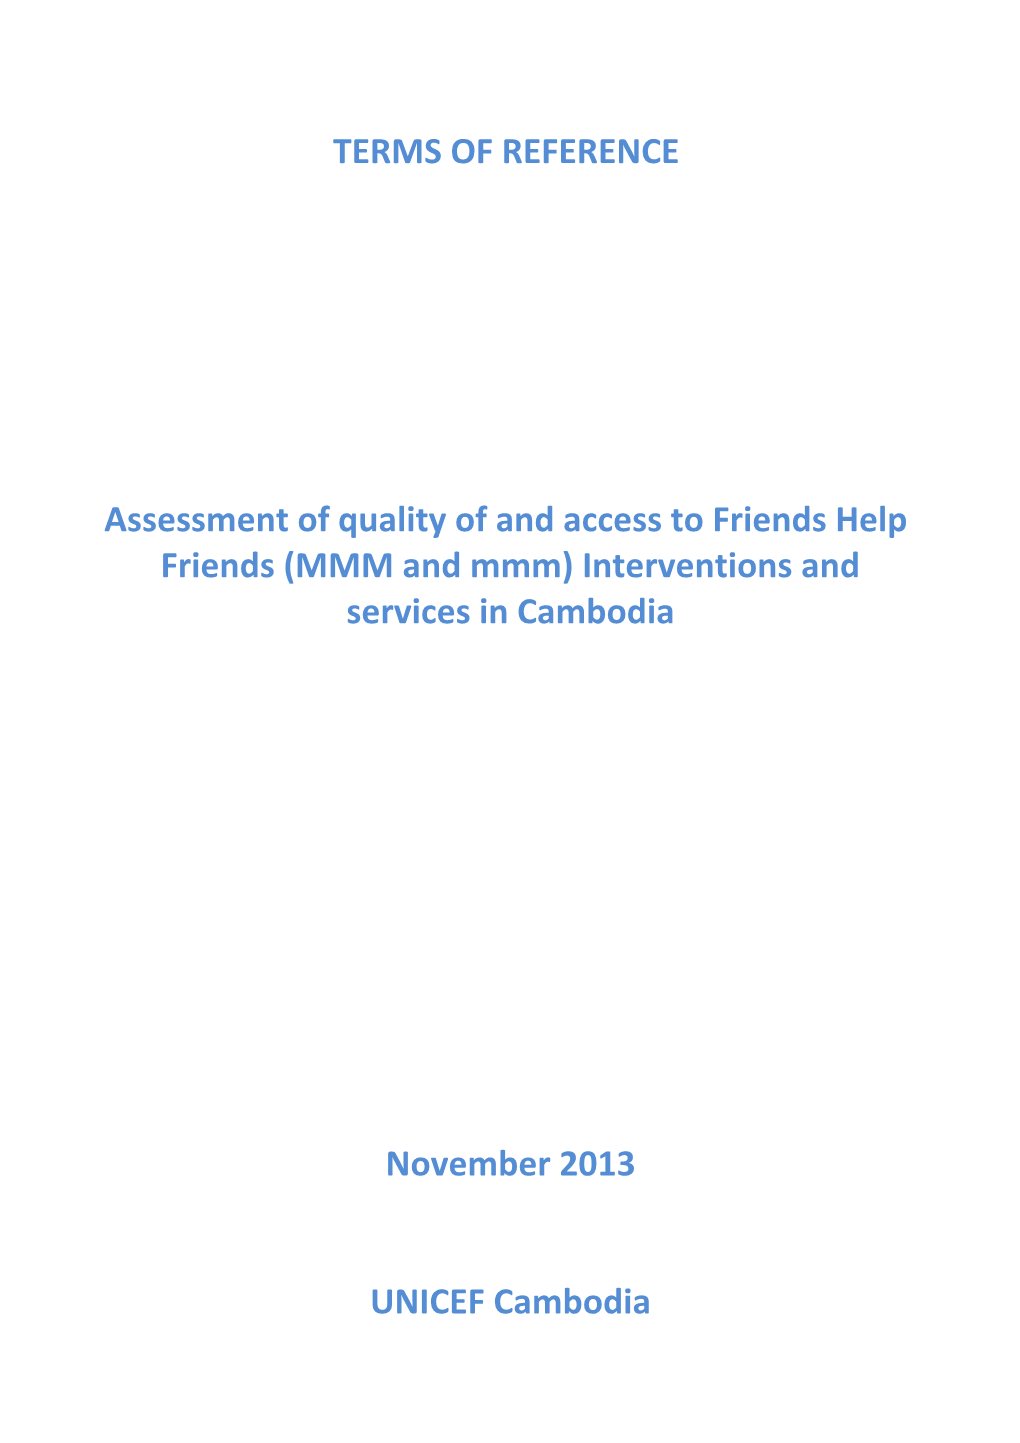 Assessment of Quality of and Access to Friends Help